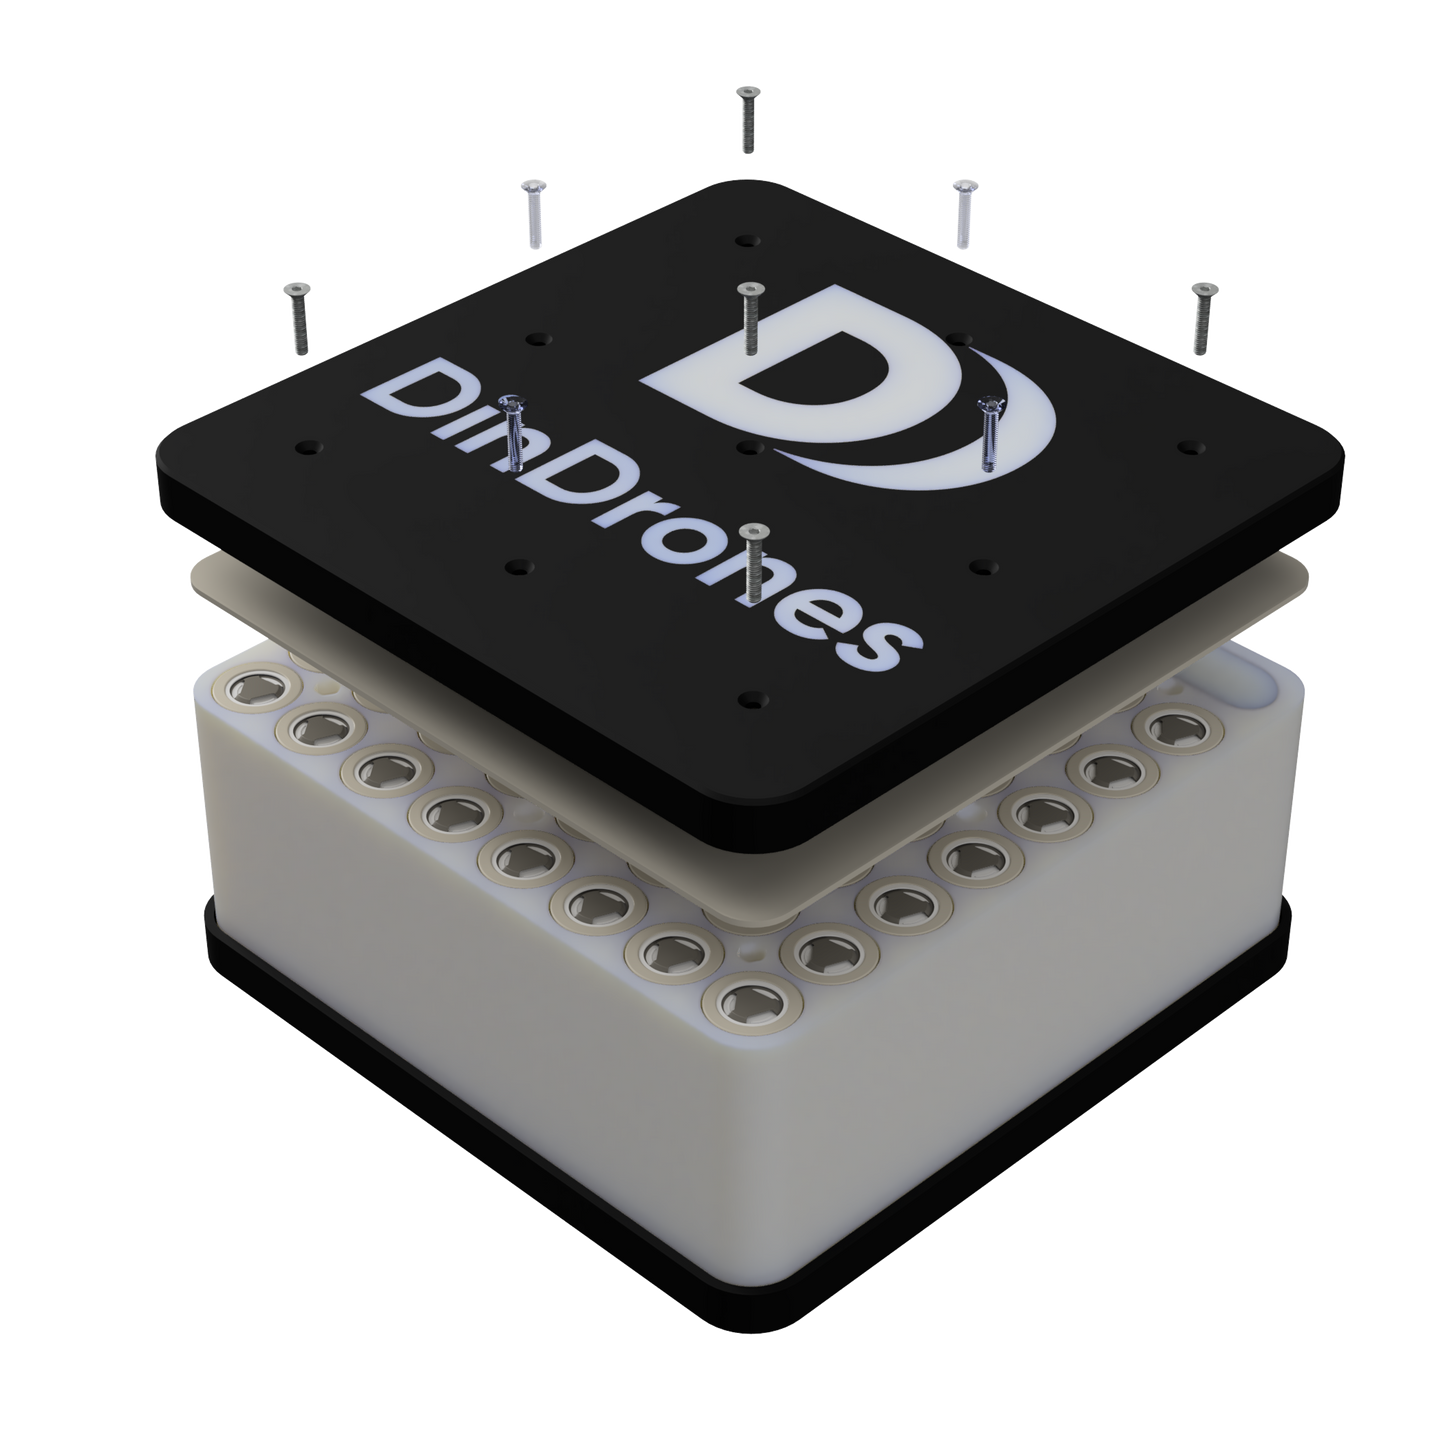 DinDrones Battery Box V2